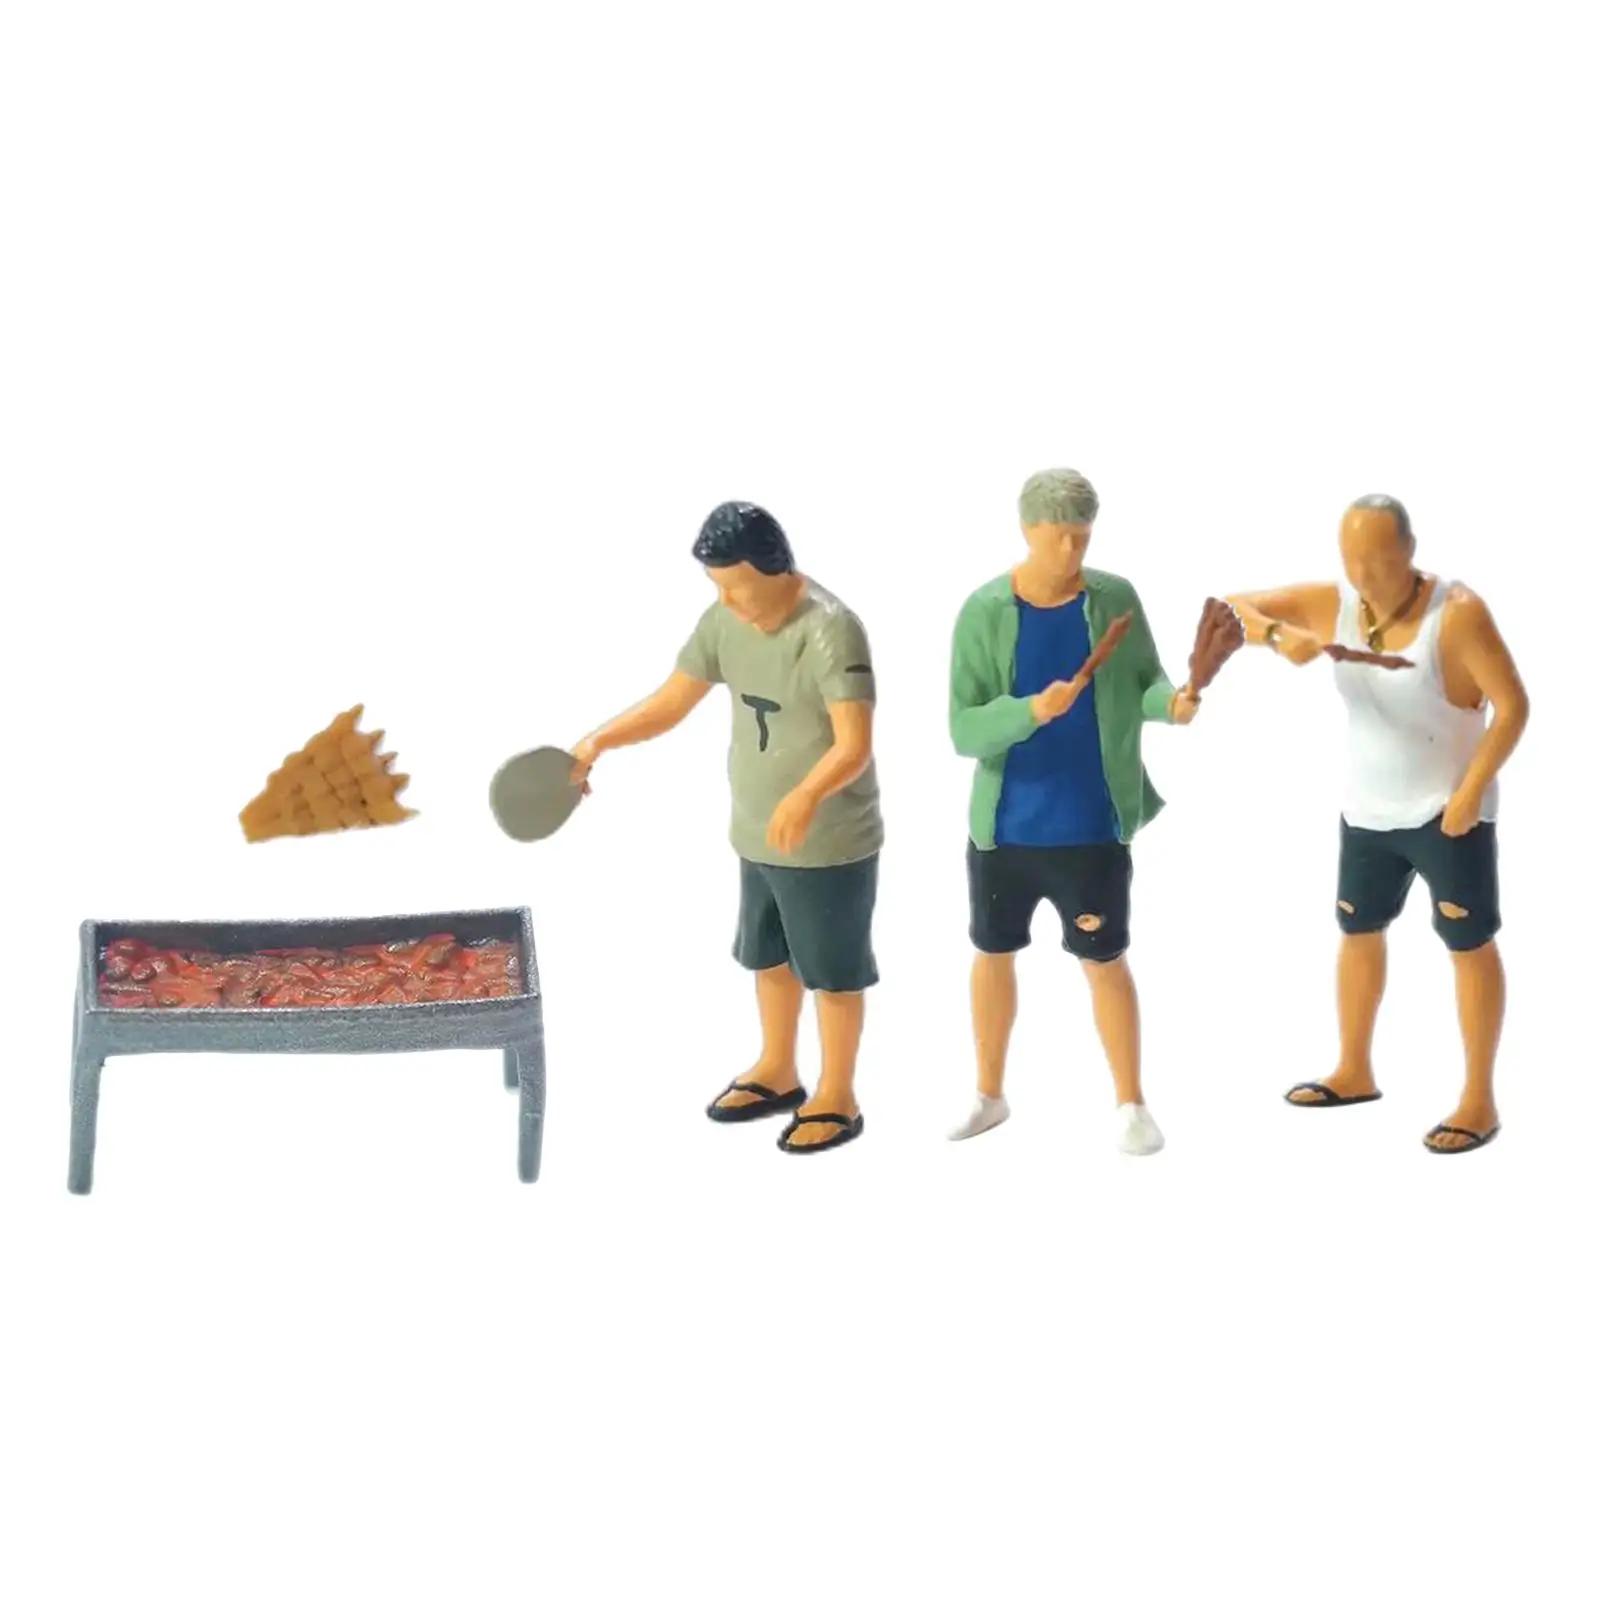 5Pcs 1:64 Scale Tiny BBQ People Set Micro Landscape with Accessories Desktop Ornament Fairy Garden Layout Diorama Scenery Decor